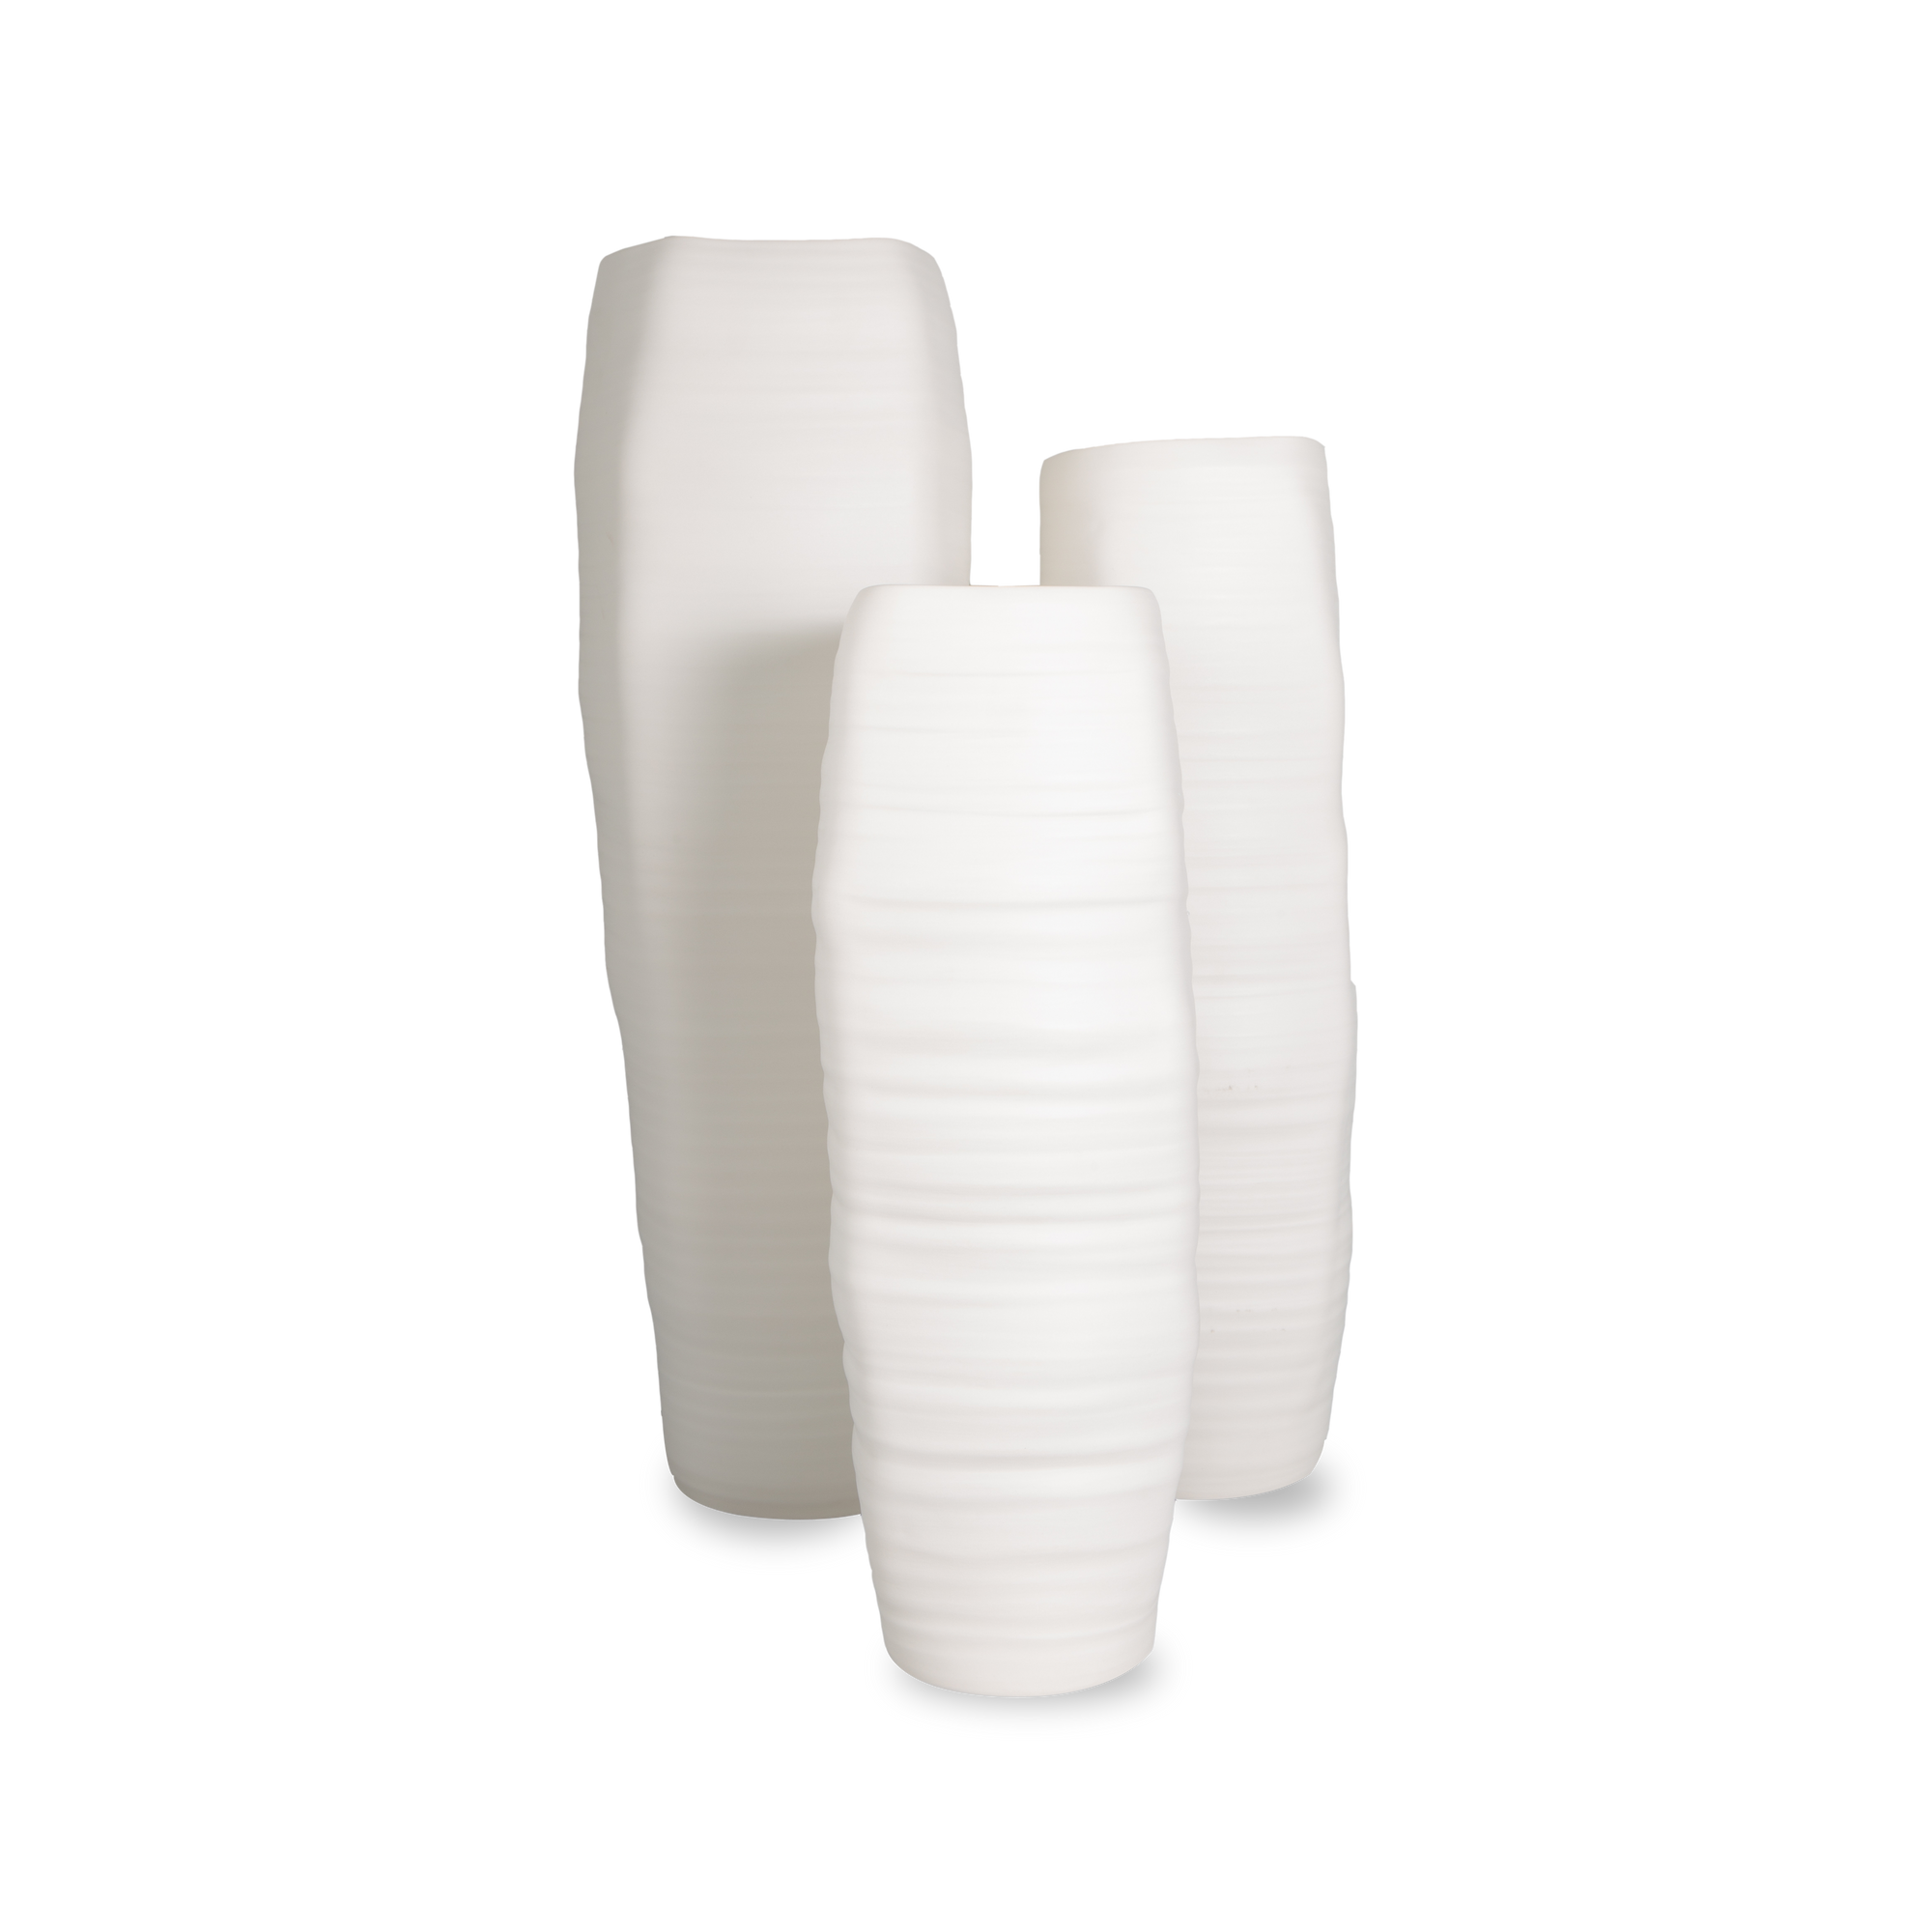 Adding an element of unique contemporary design, the Rock Vase was carefully handcrafted in Italy.